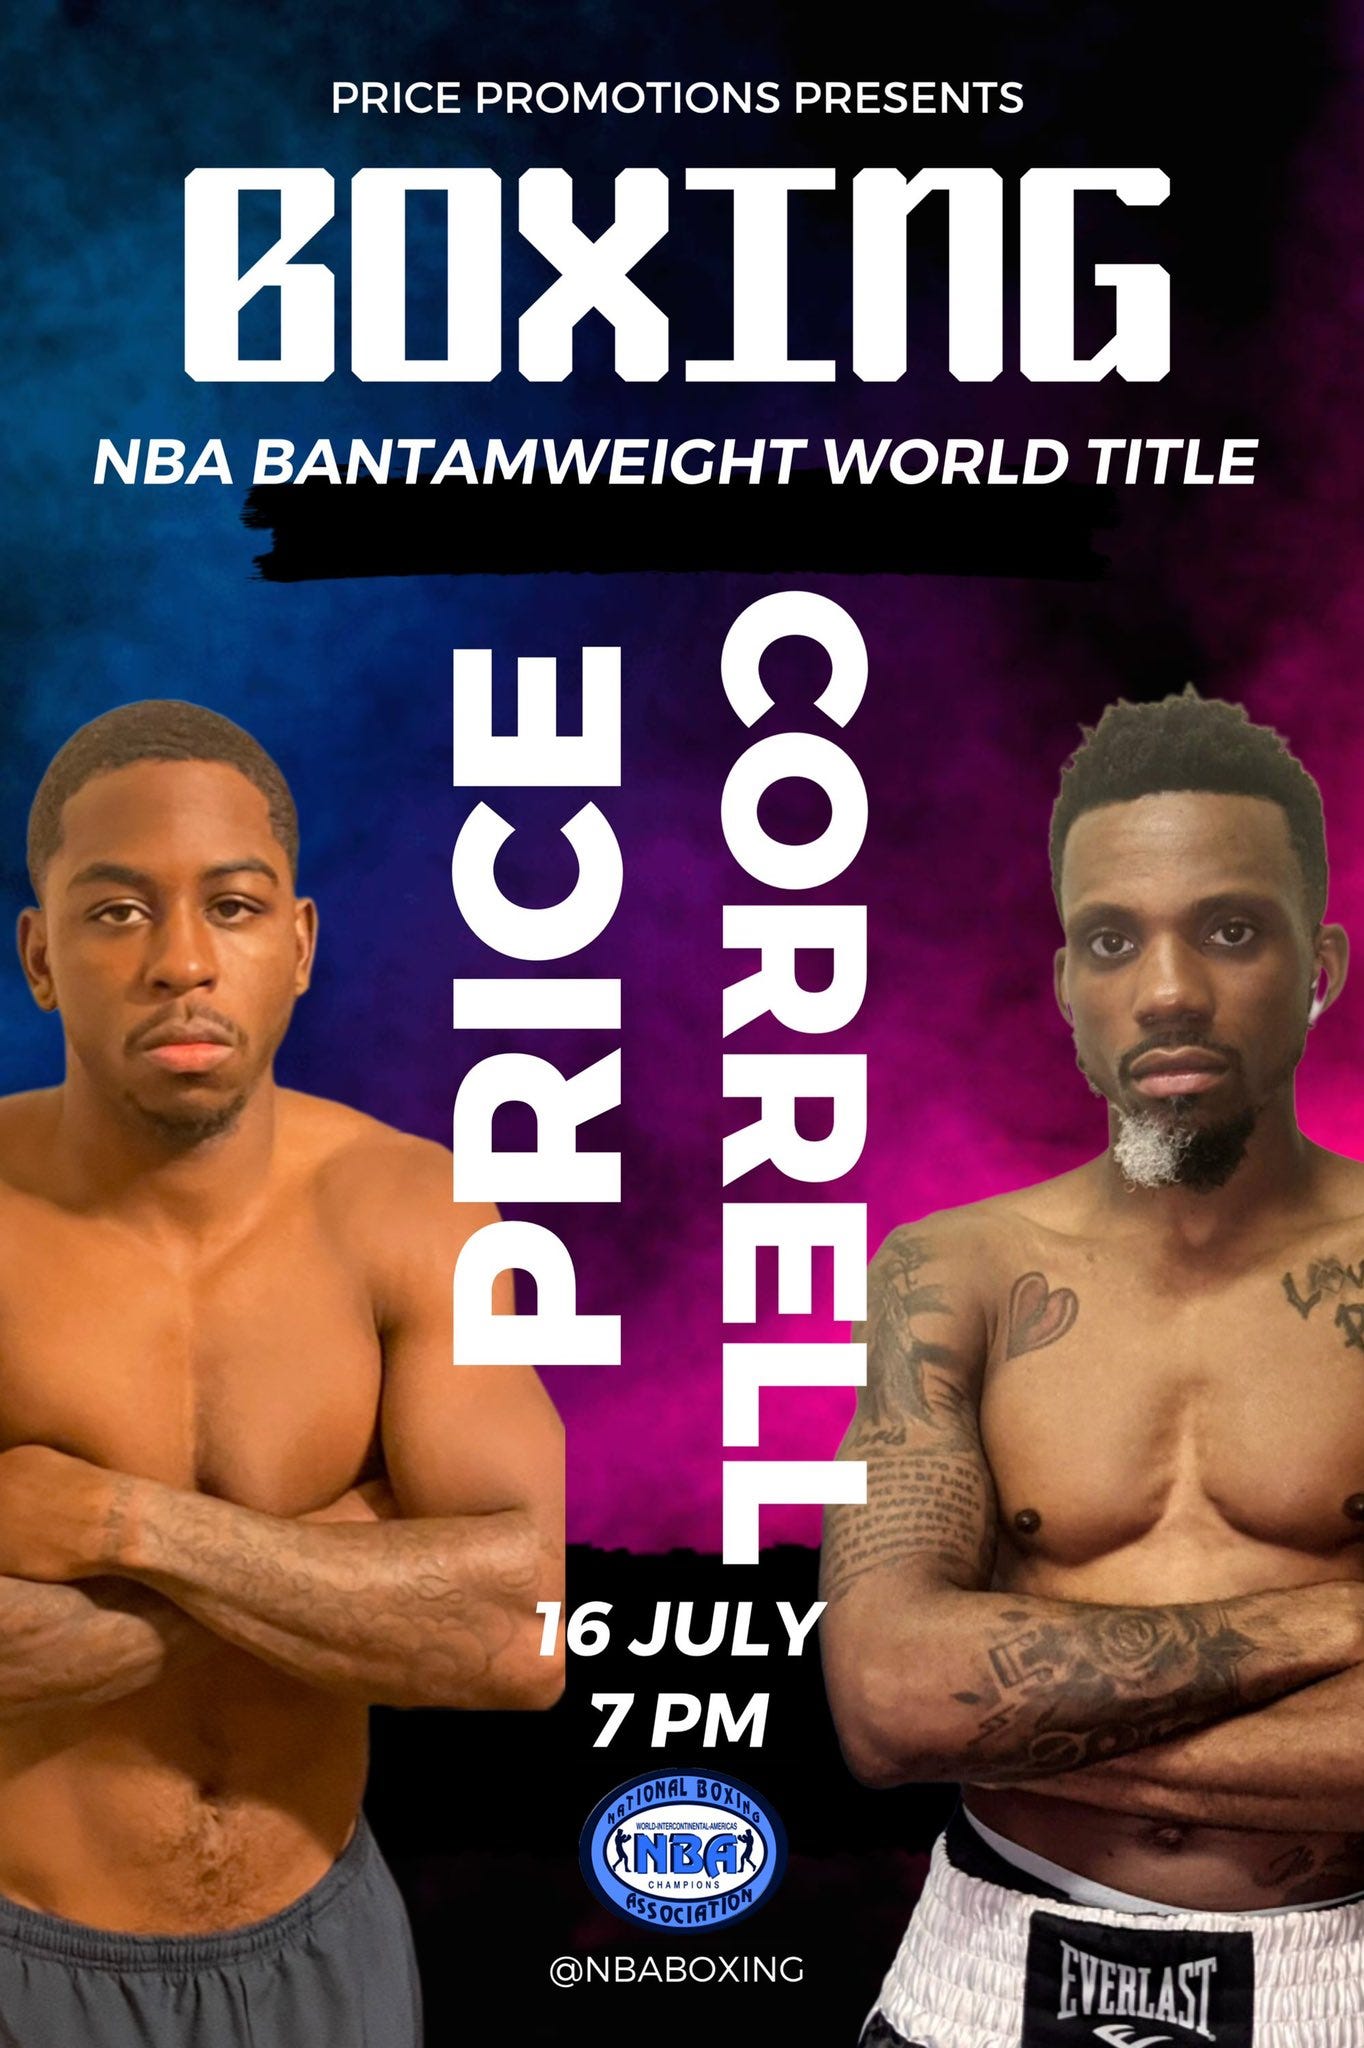 LatinboxSports on Twitter: "Price Promotions Features Dylan Price vs Drew  Correll for NBA World Bantamweight Title on Saturday, July 16th at  Elevation Event Center in Chester, PA. @NBABoxing #boxing #nbaboxing  https://t.co/As5ejjdKrw" /